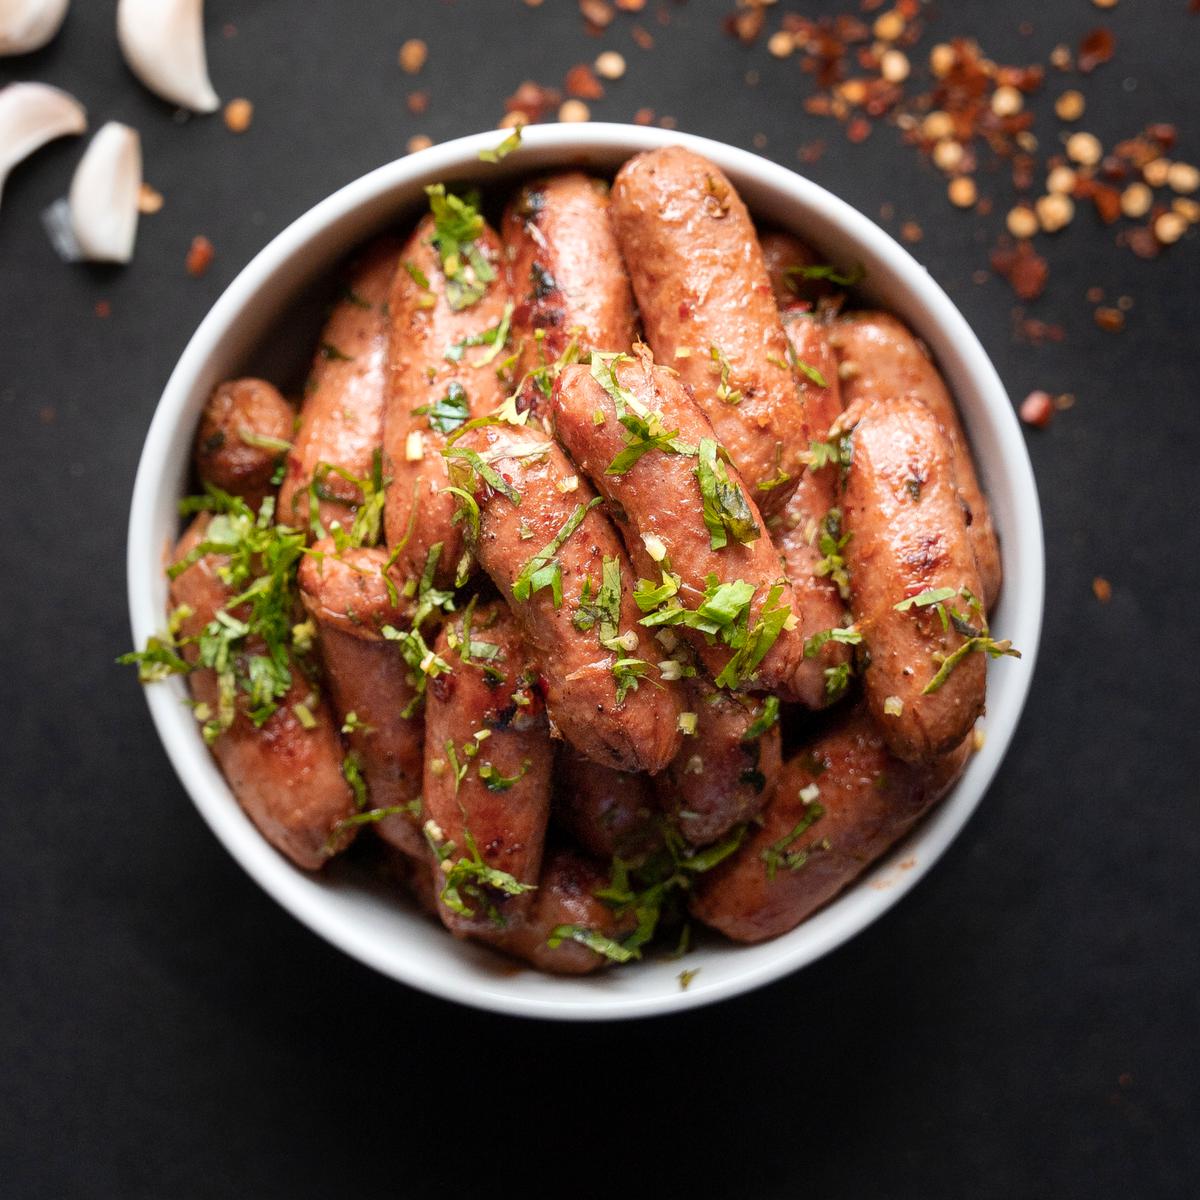 Sausages tossed with chilli, a bar favourite